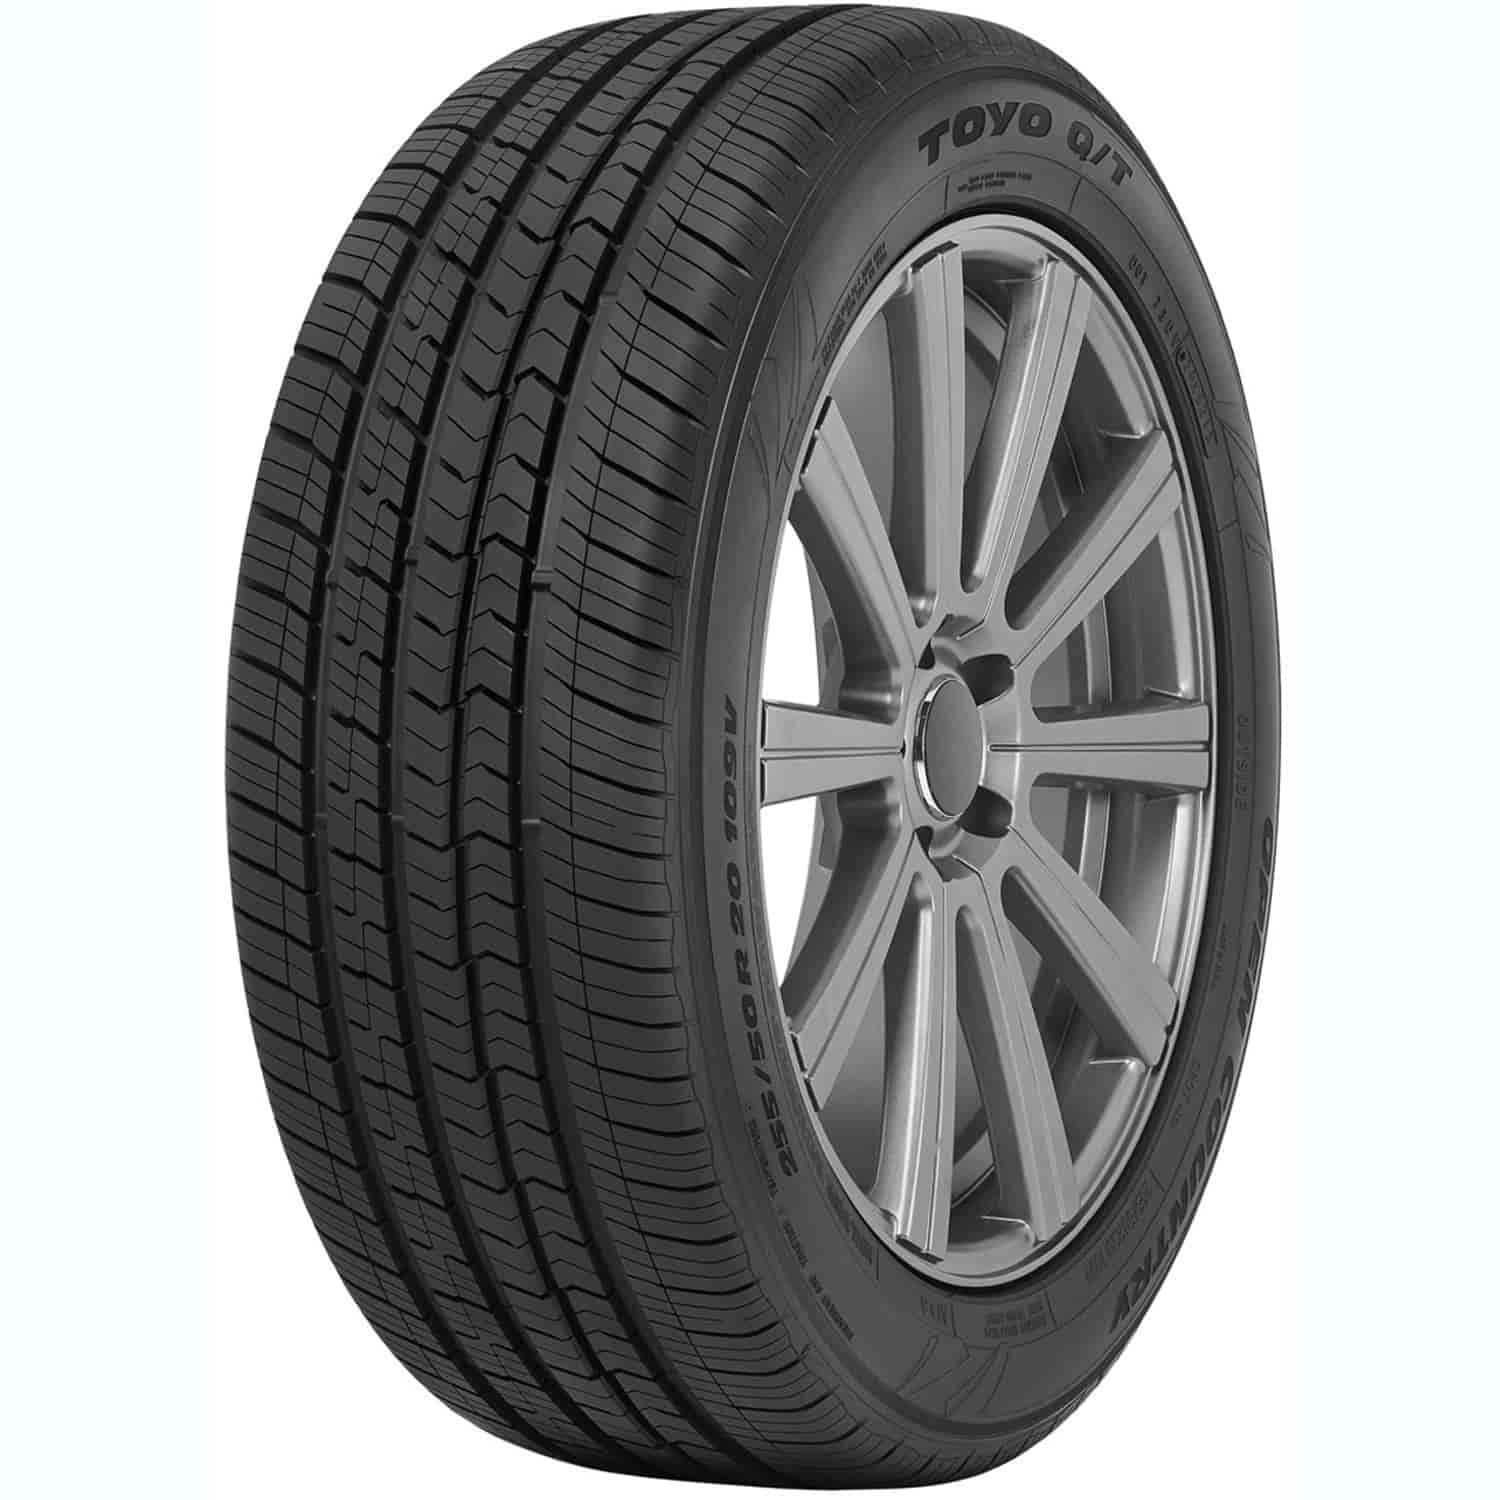 OPEN COUNTRY Q/T P265/65R18 112H